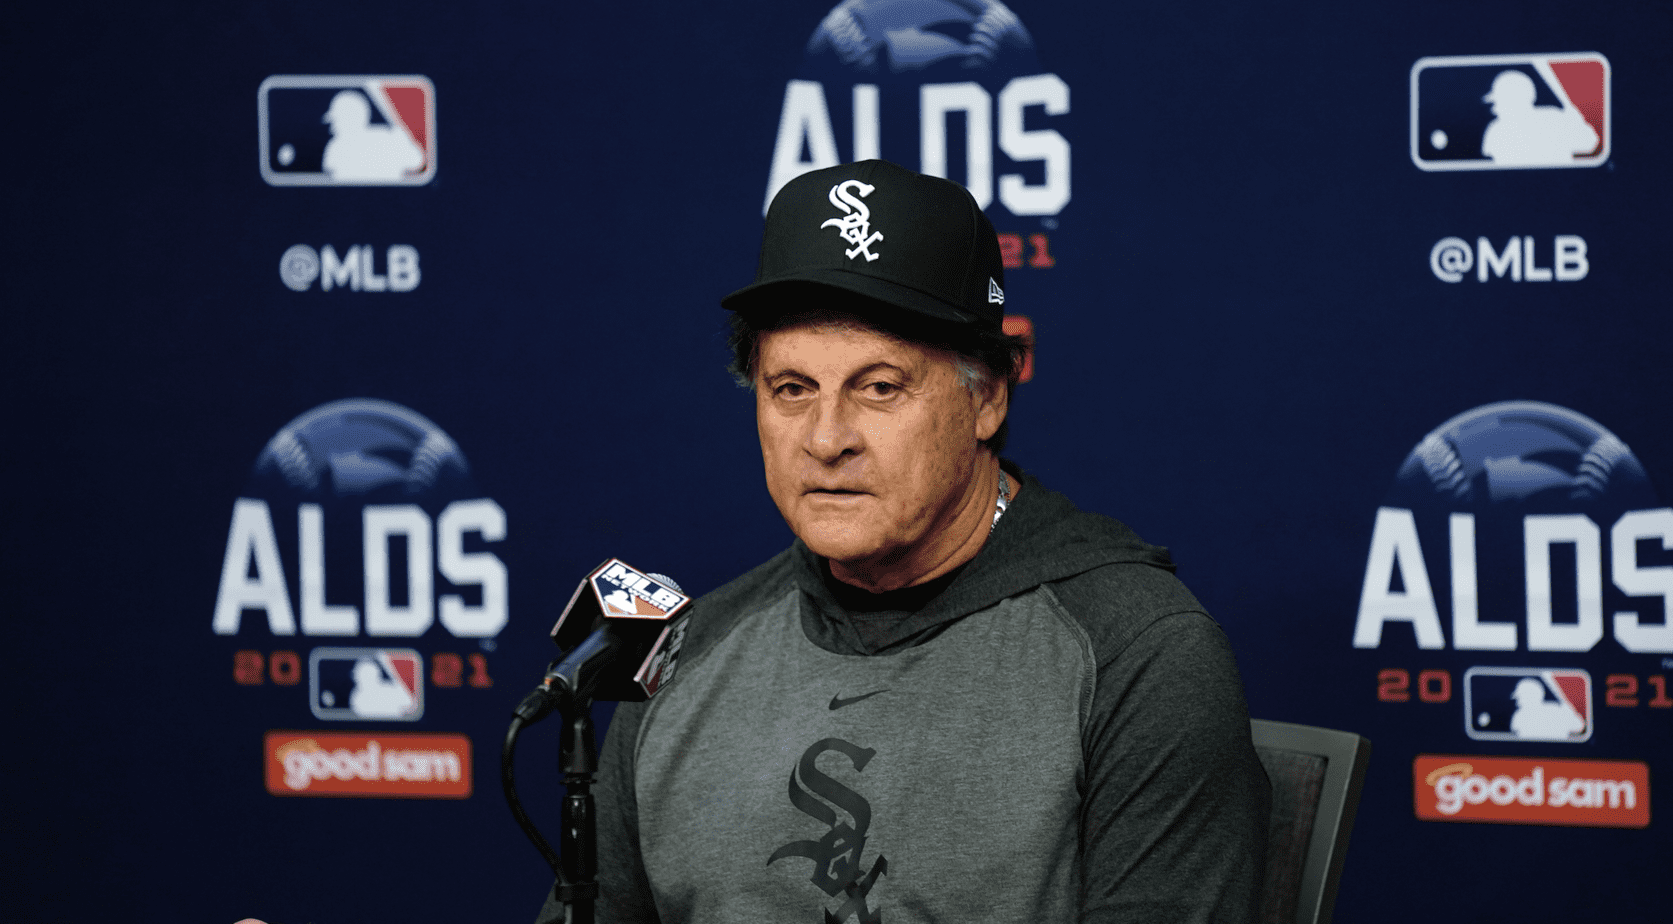 Chicago White Sox manager Tony La Russa Called out his longtime rival Dusty Baker and his Astros after Jose Abreu was hit by a pitch